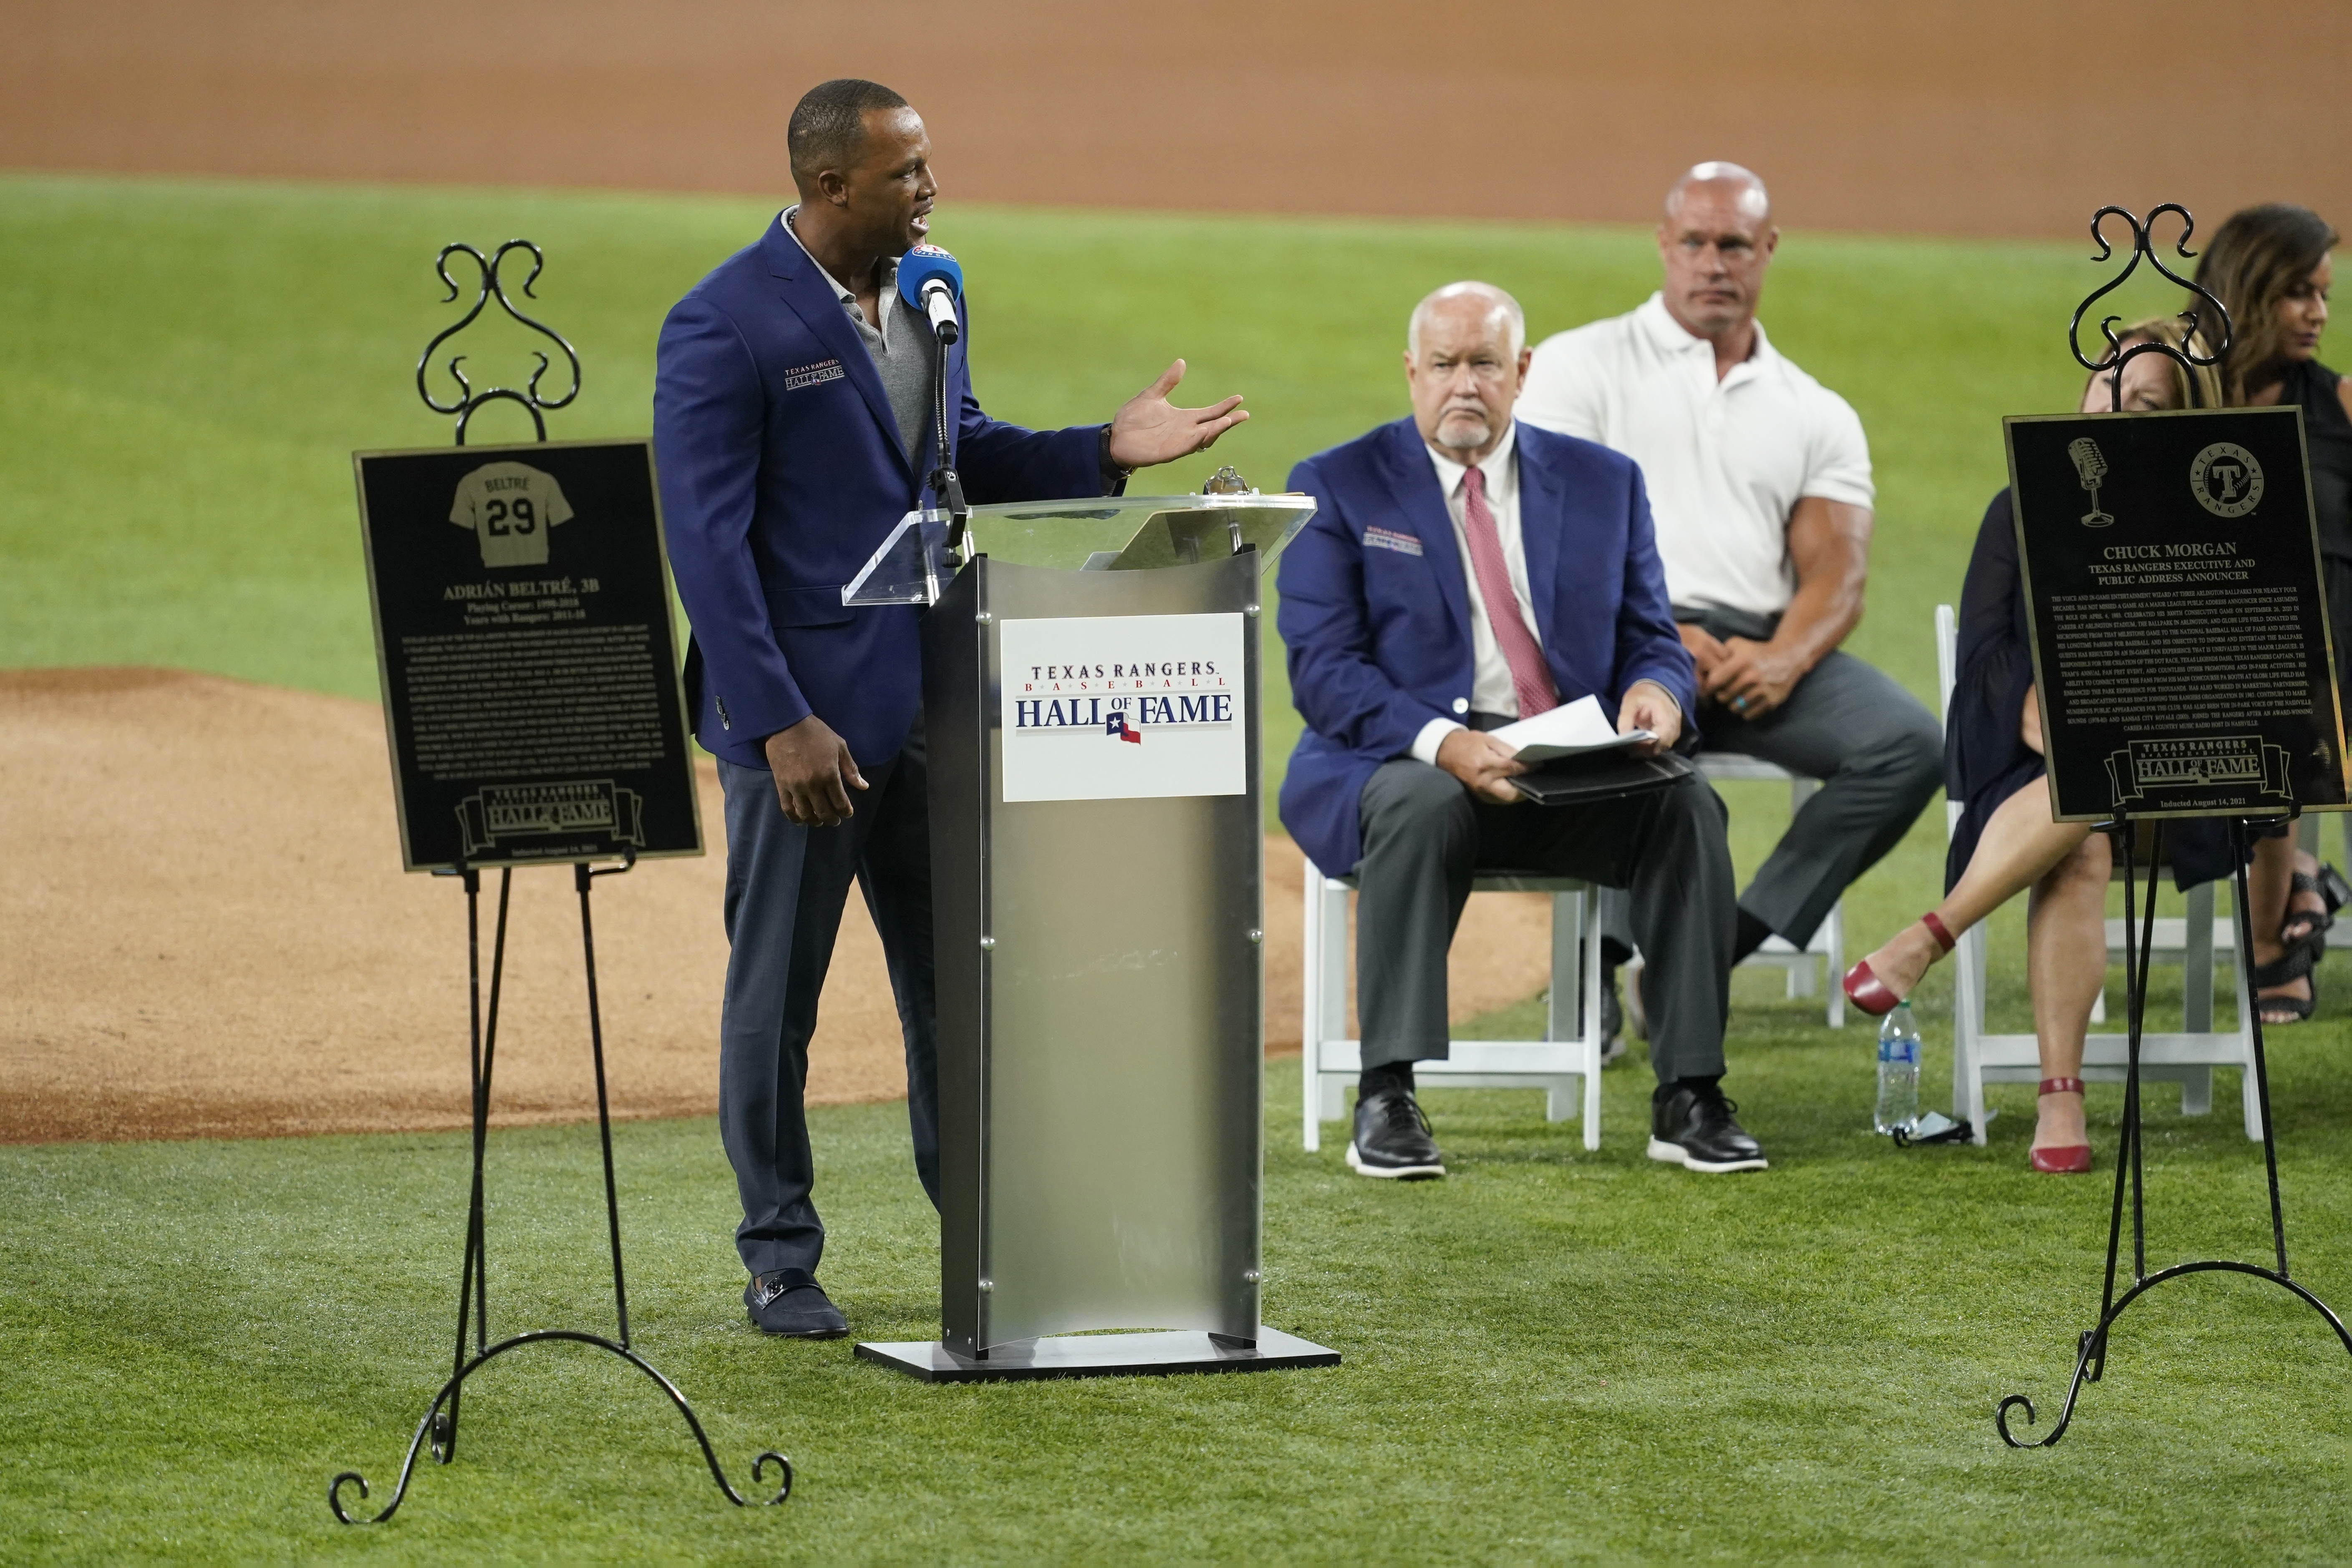 Congrats to Chuck Morgan and Adrian Beltre on your induction into